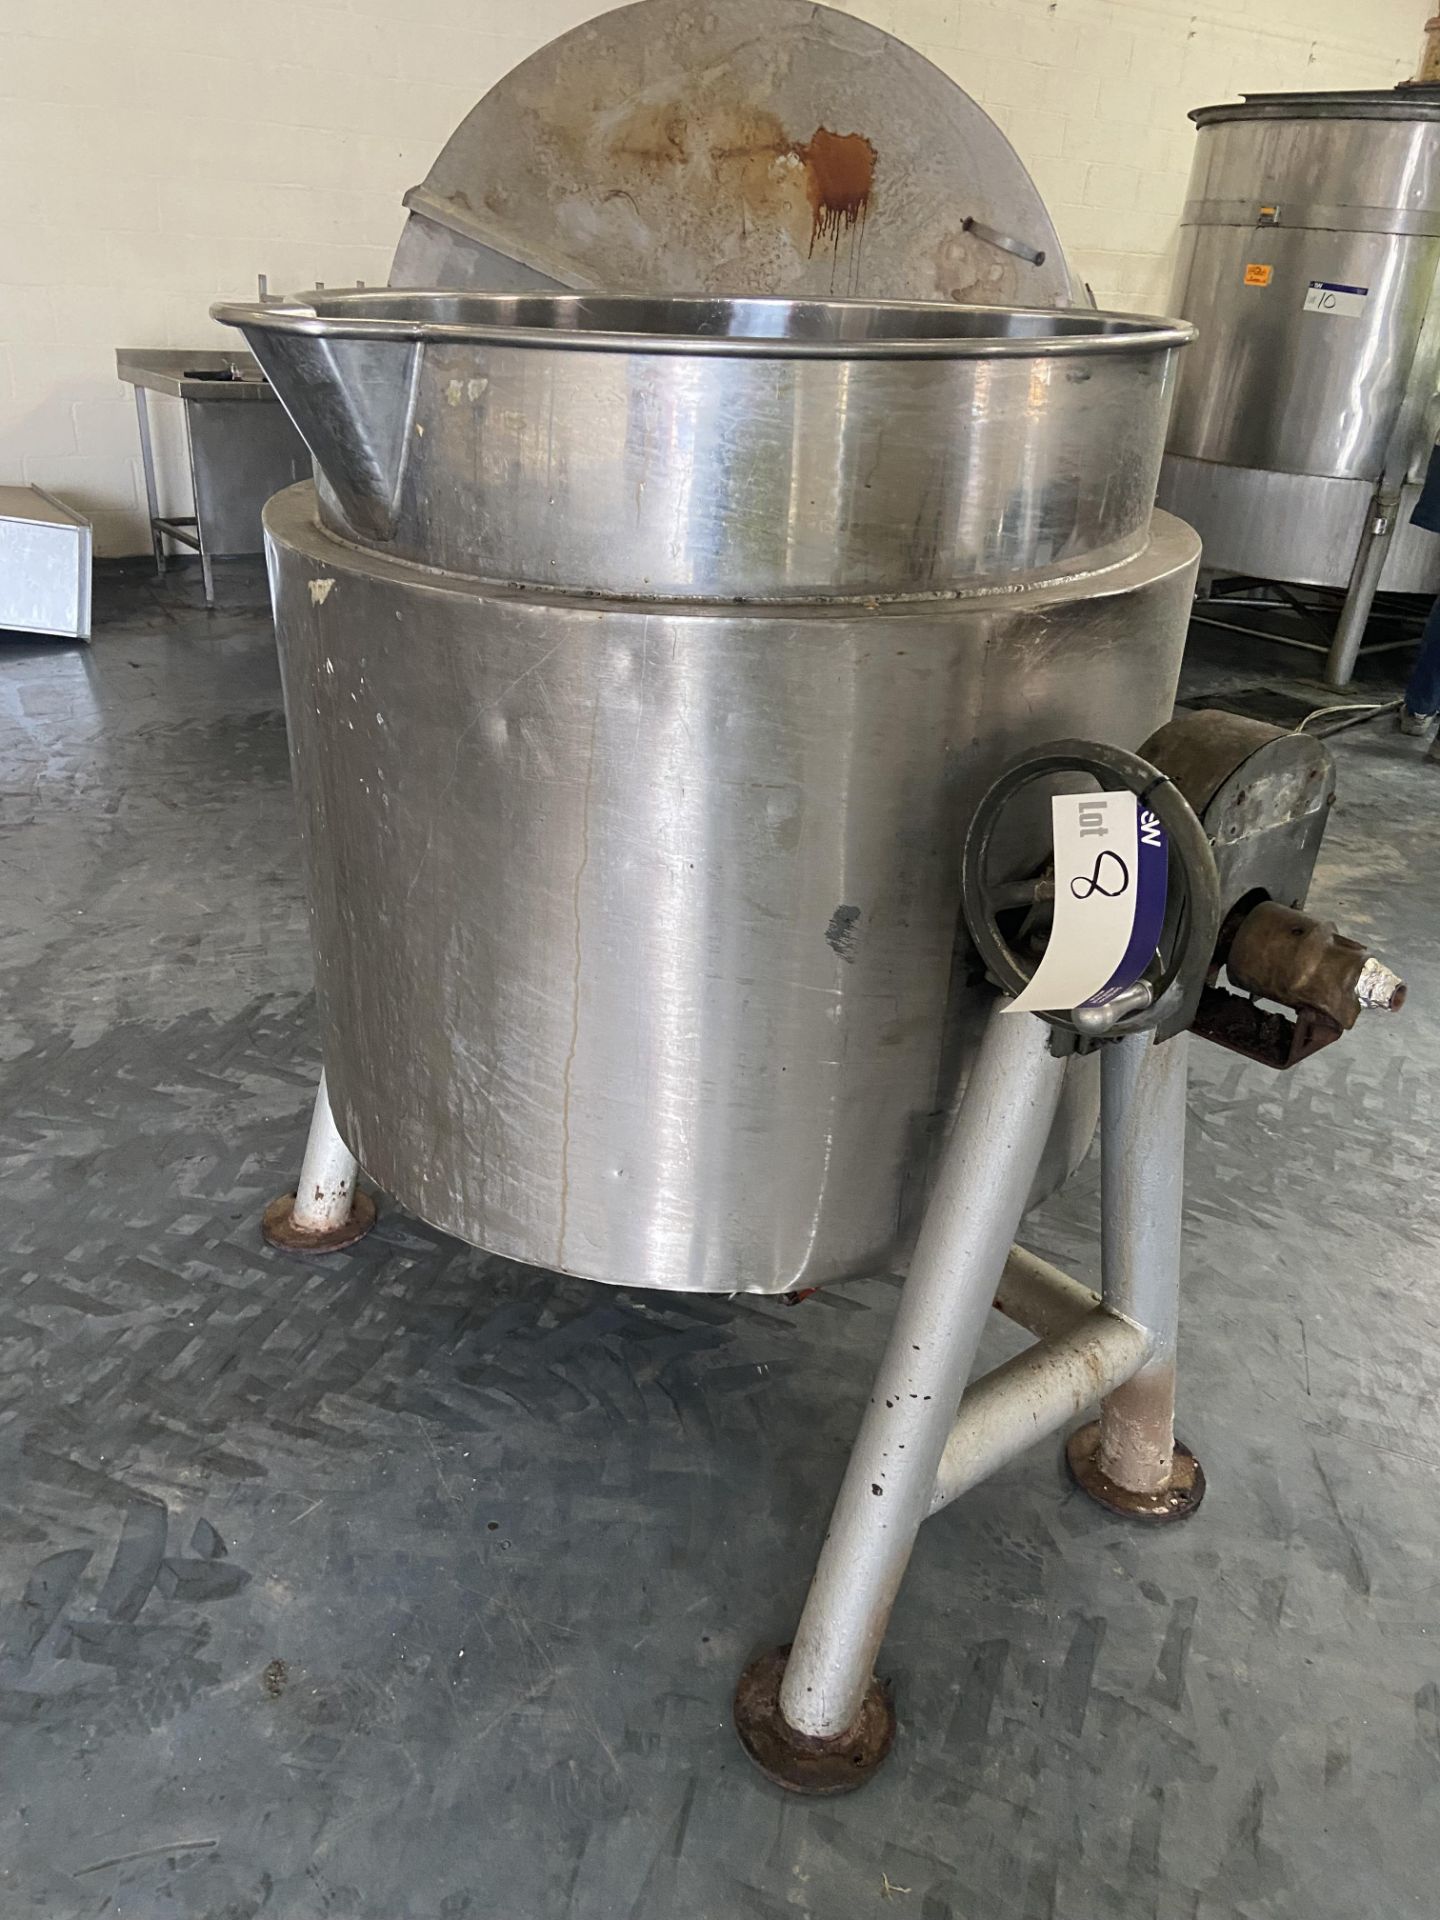 Jacketed Stainless Steel Tipping Tank, 900mm dia. x approx. 900mm deep Please read the following